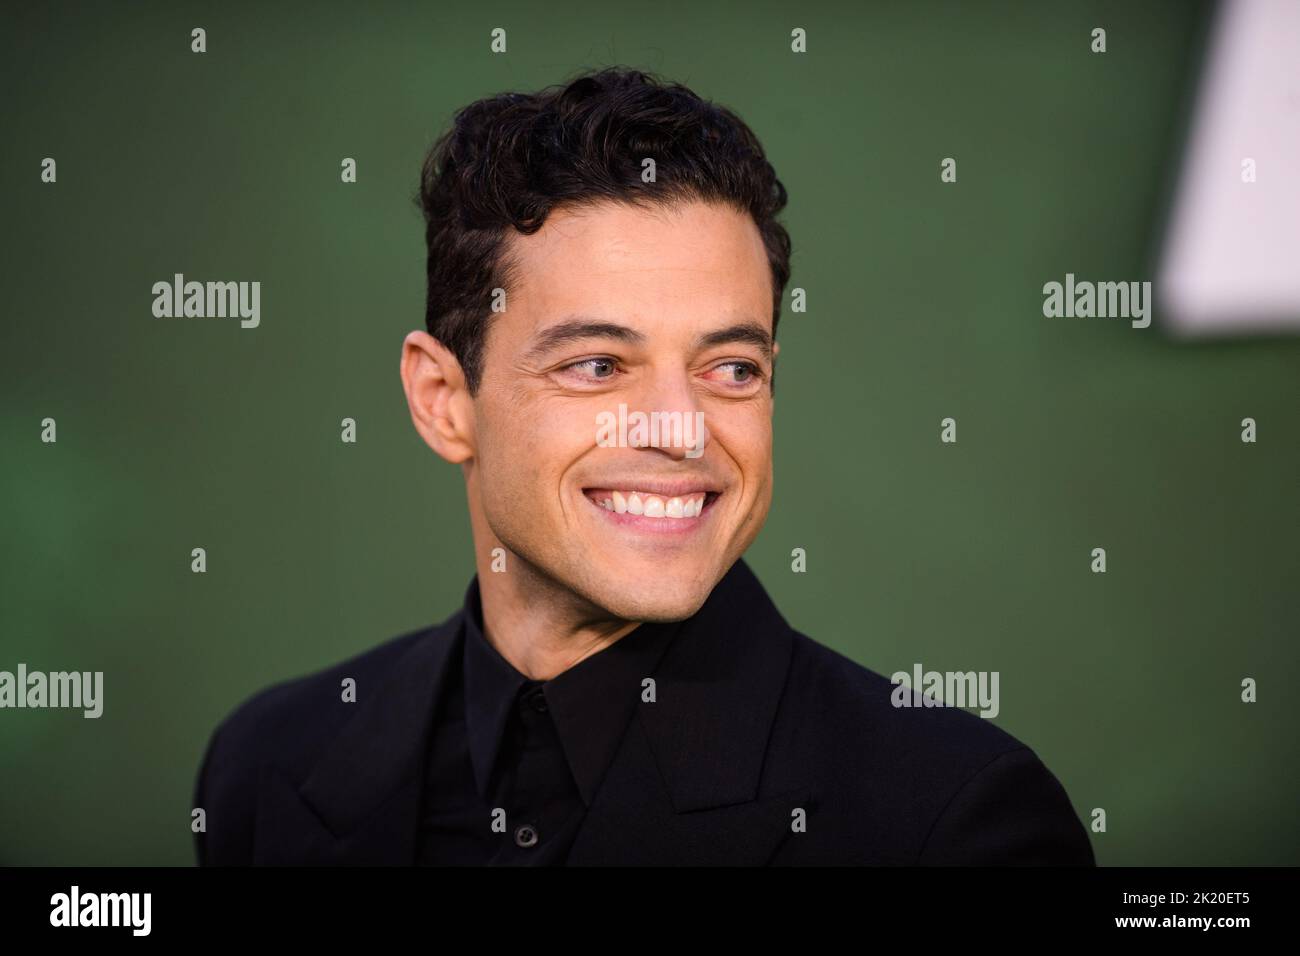 London, UK. 21 September 2022. Remi Malek attending the European premiere of Amsterdam at the Odeon Luxe Leicester Square Cinema, London Picture date: Wednesday September 21, 2022. Photo credit should read: Matt Crossick/Empics/Alamy Live News Stock Photo